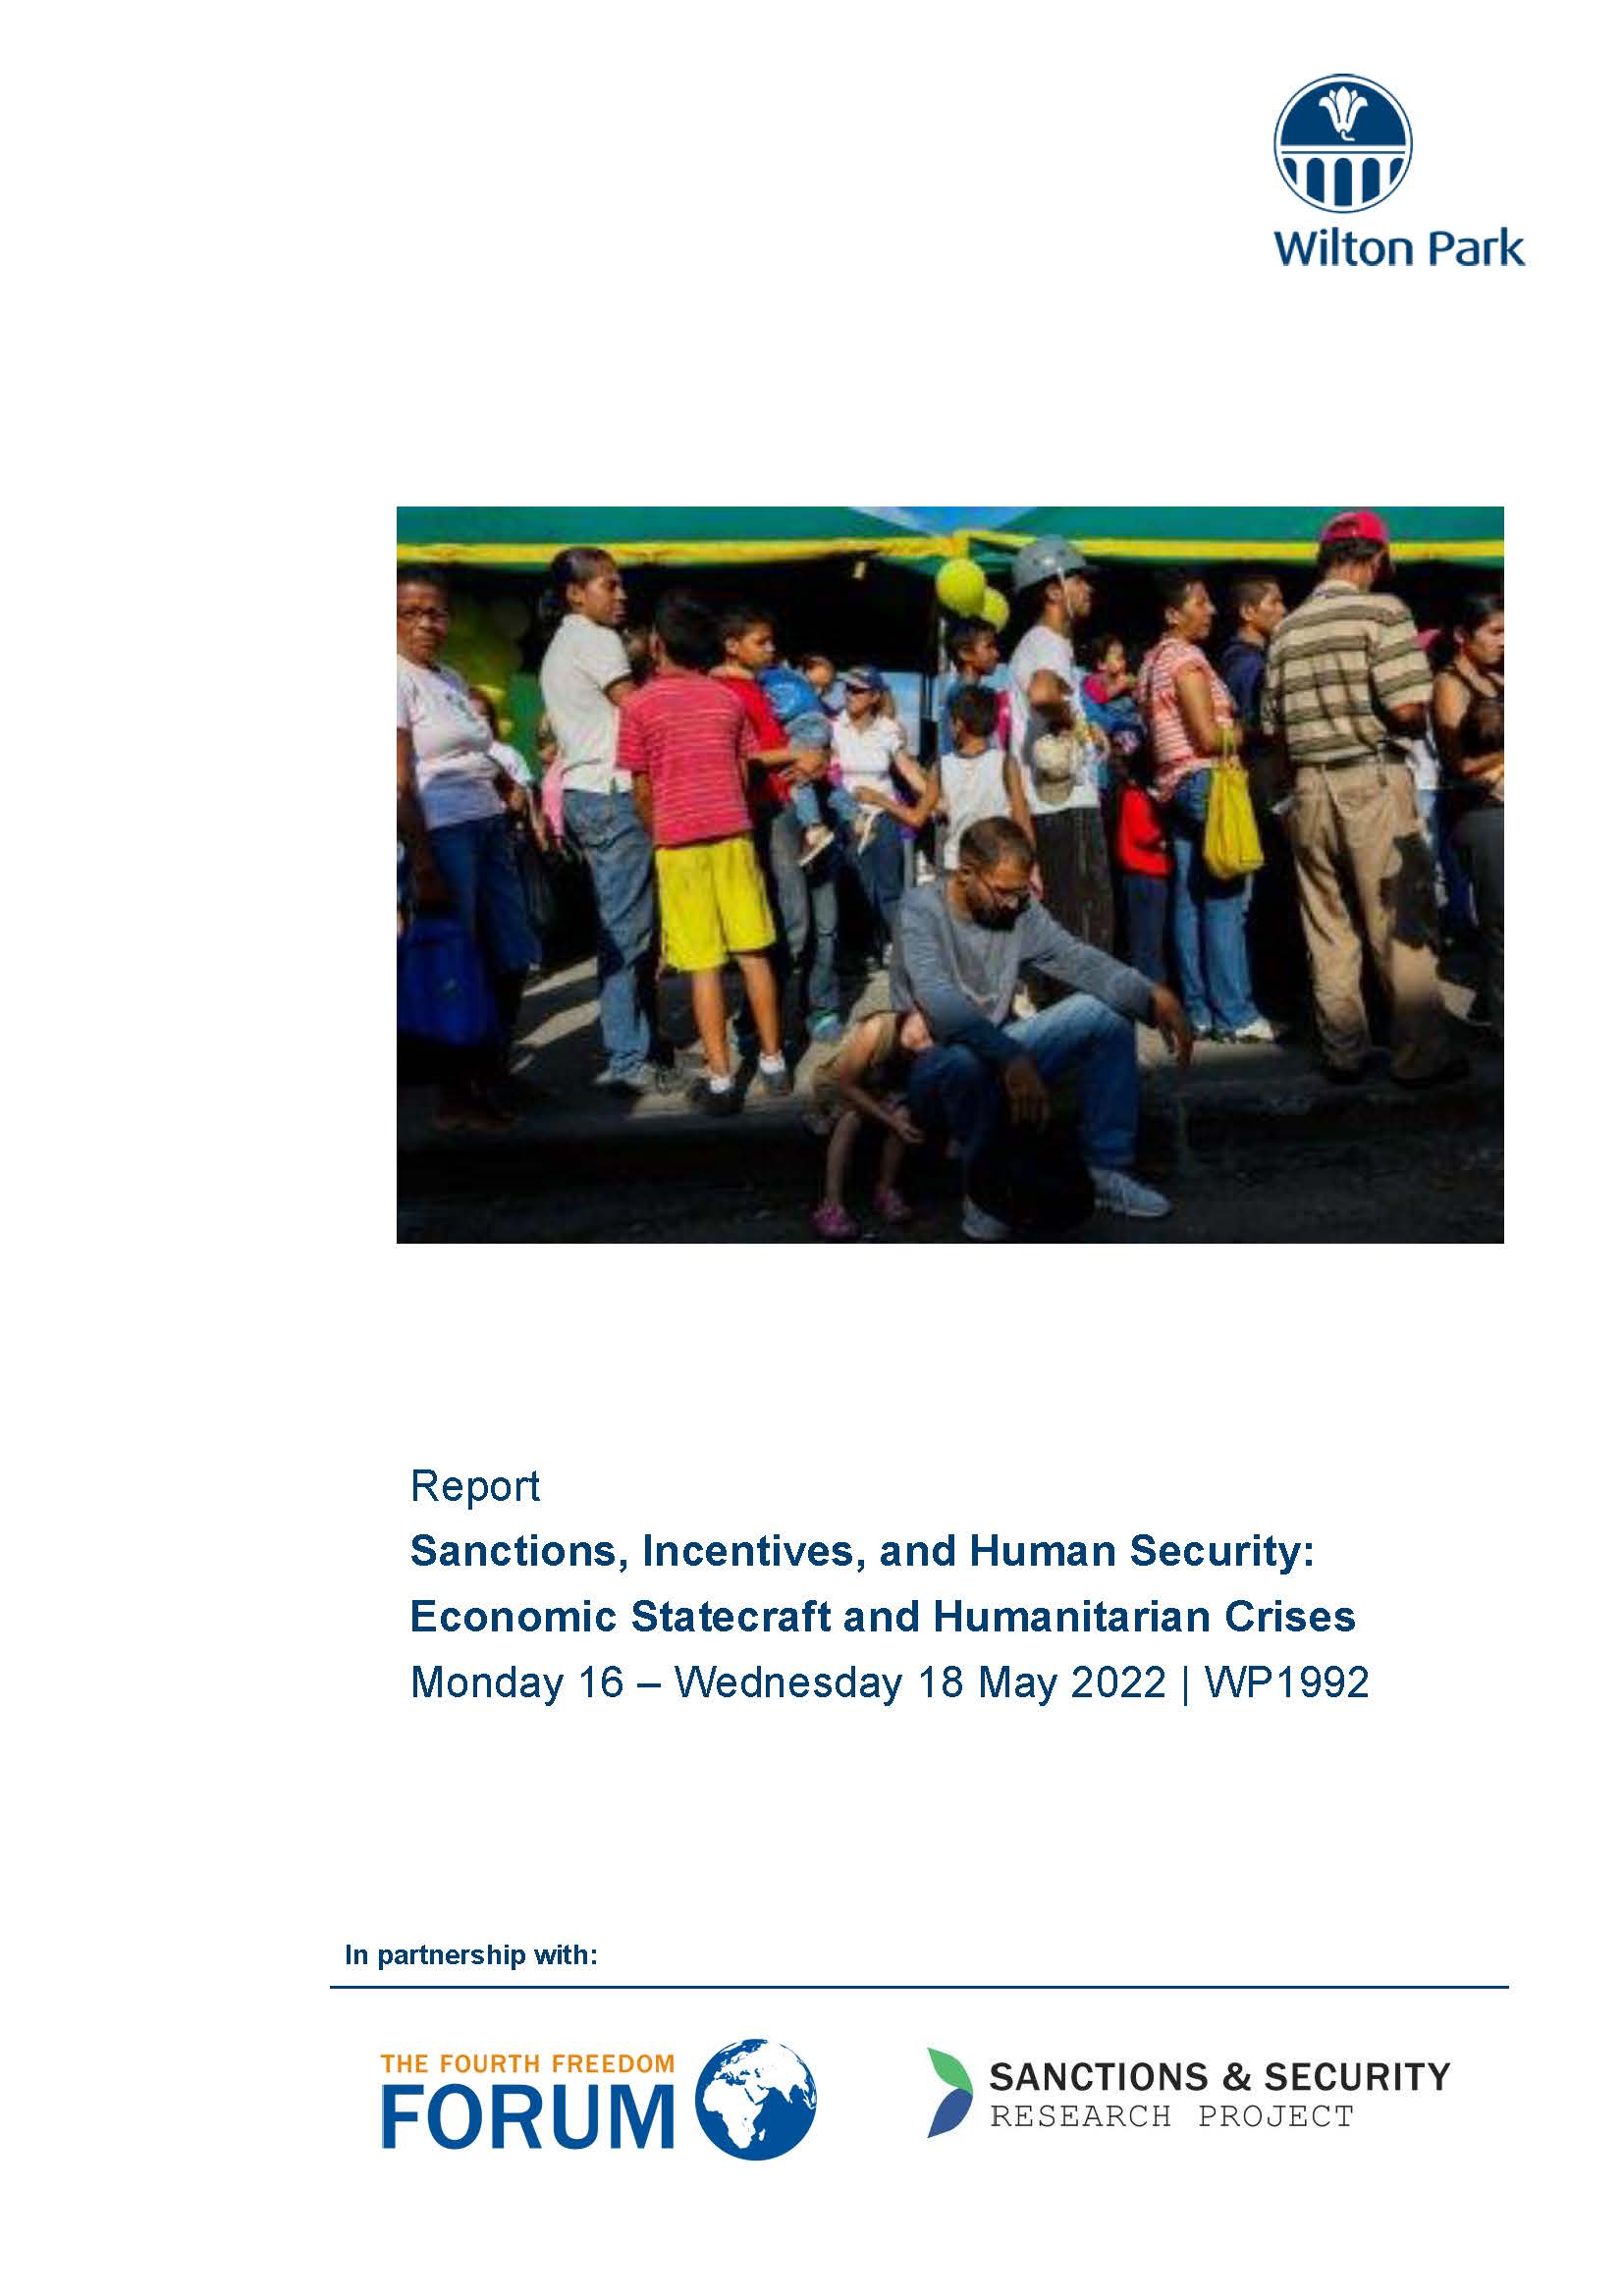 Wilton Park Conference Report on Sanctions, Incentives, and Human Security: Economic Statecraft and Humanitarian Crises